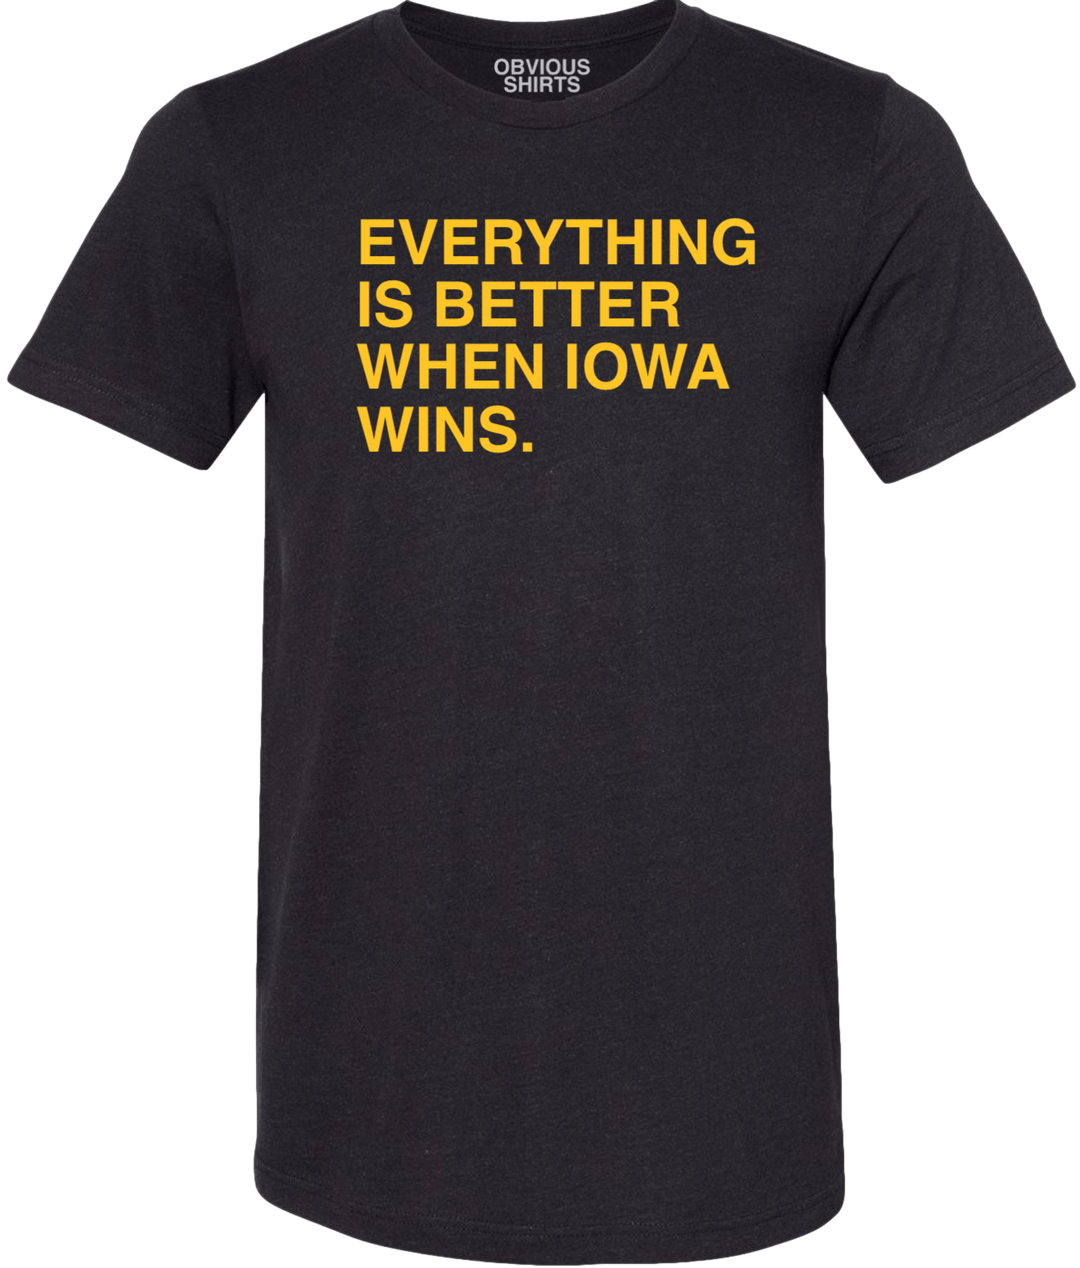 EVERYTHING IS BETTER WHEN IOWA WINS. - OBVIOUS SHIRTS